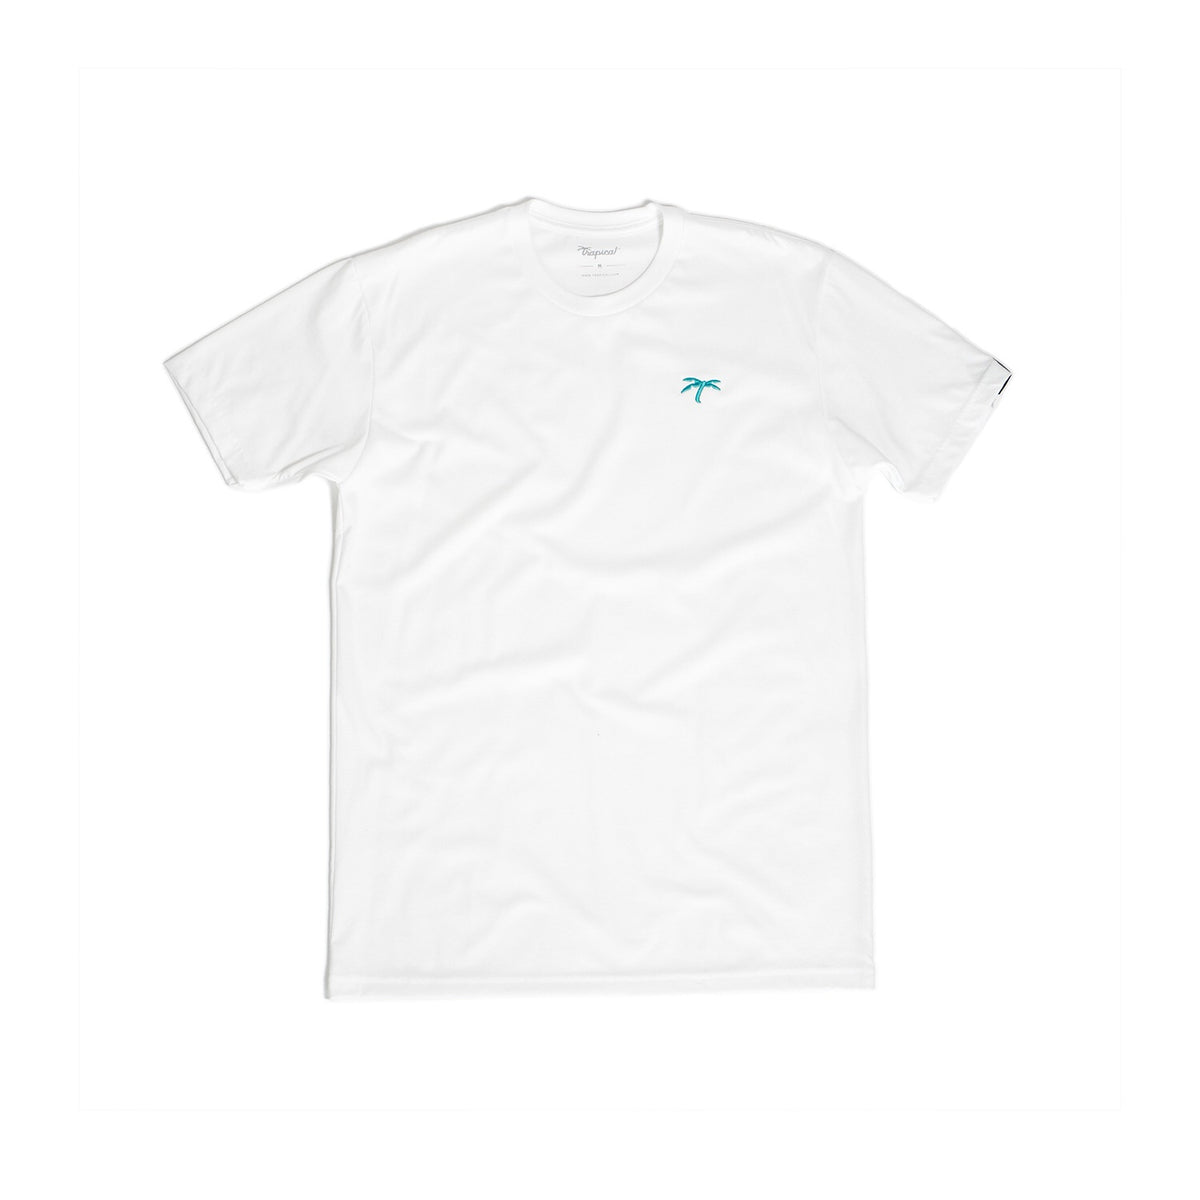 Yolo T white-teal - Trapical